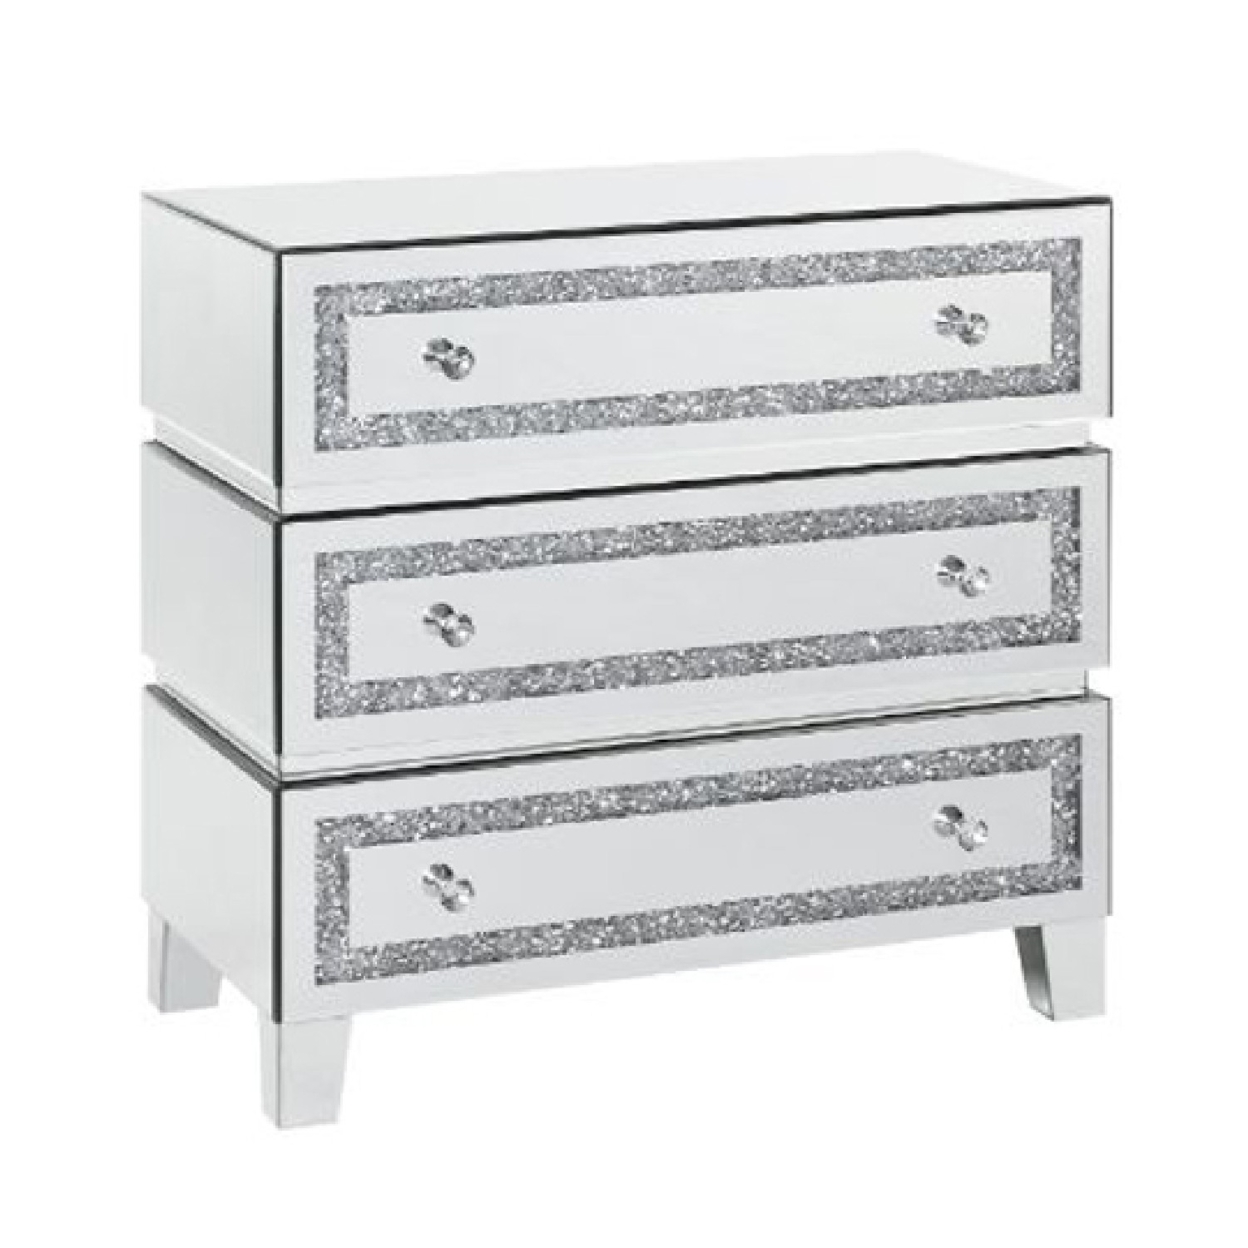 Storage Cabinet With 3 Drawers And Faux Diamond Inlays, Silver- Saltoro Sherpi